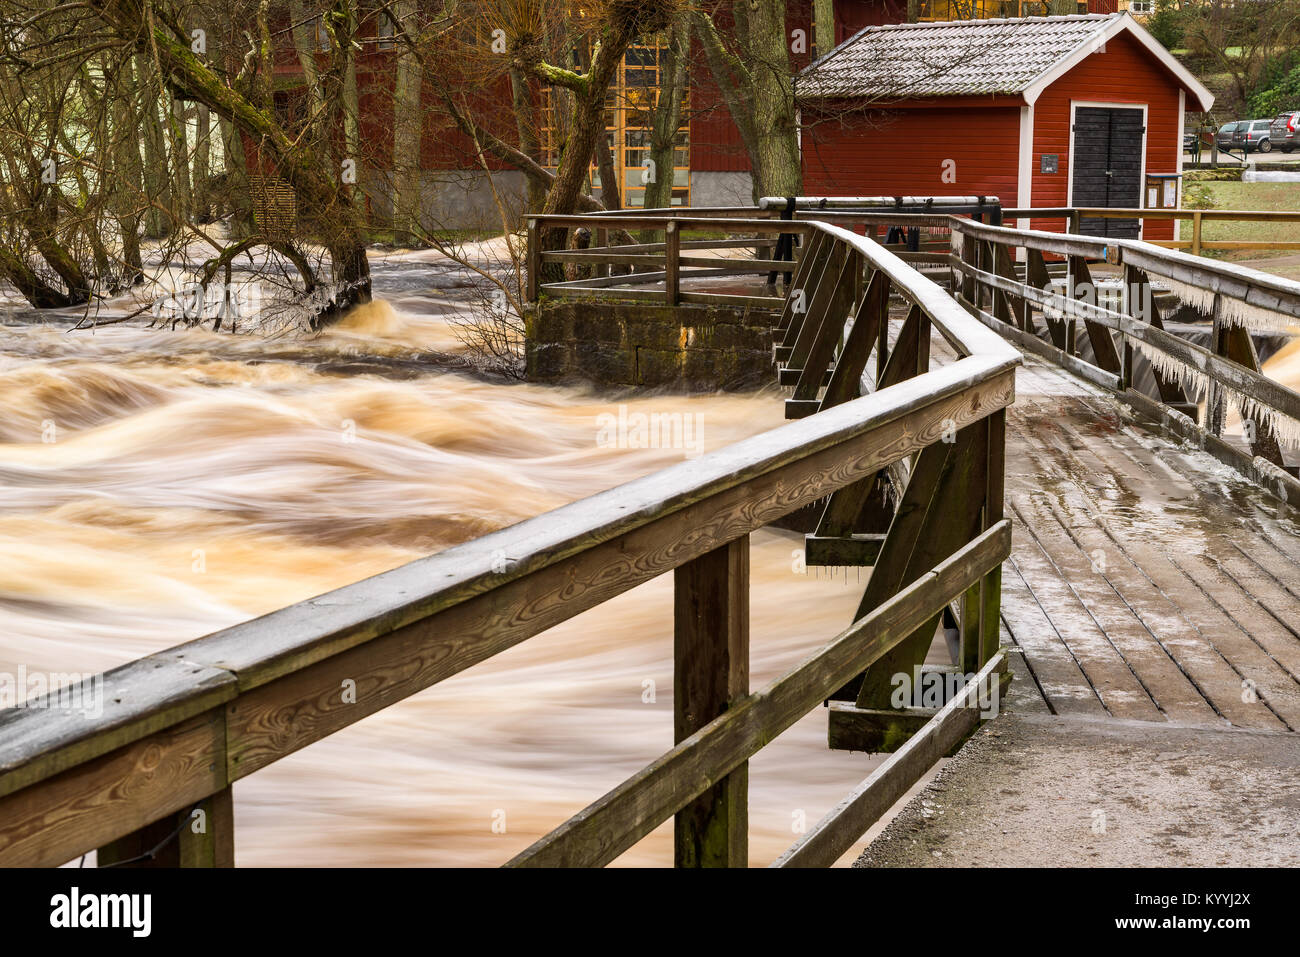 Morrum, Sweden - January 8, 2018: Documentary of everyday life and environment. Frozen bridge over raging river during flooding event. Buildings in th Stock Photo